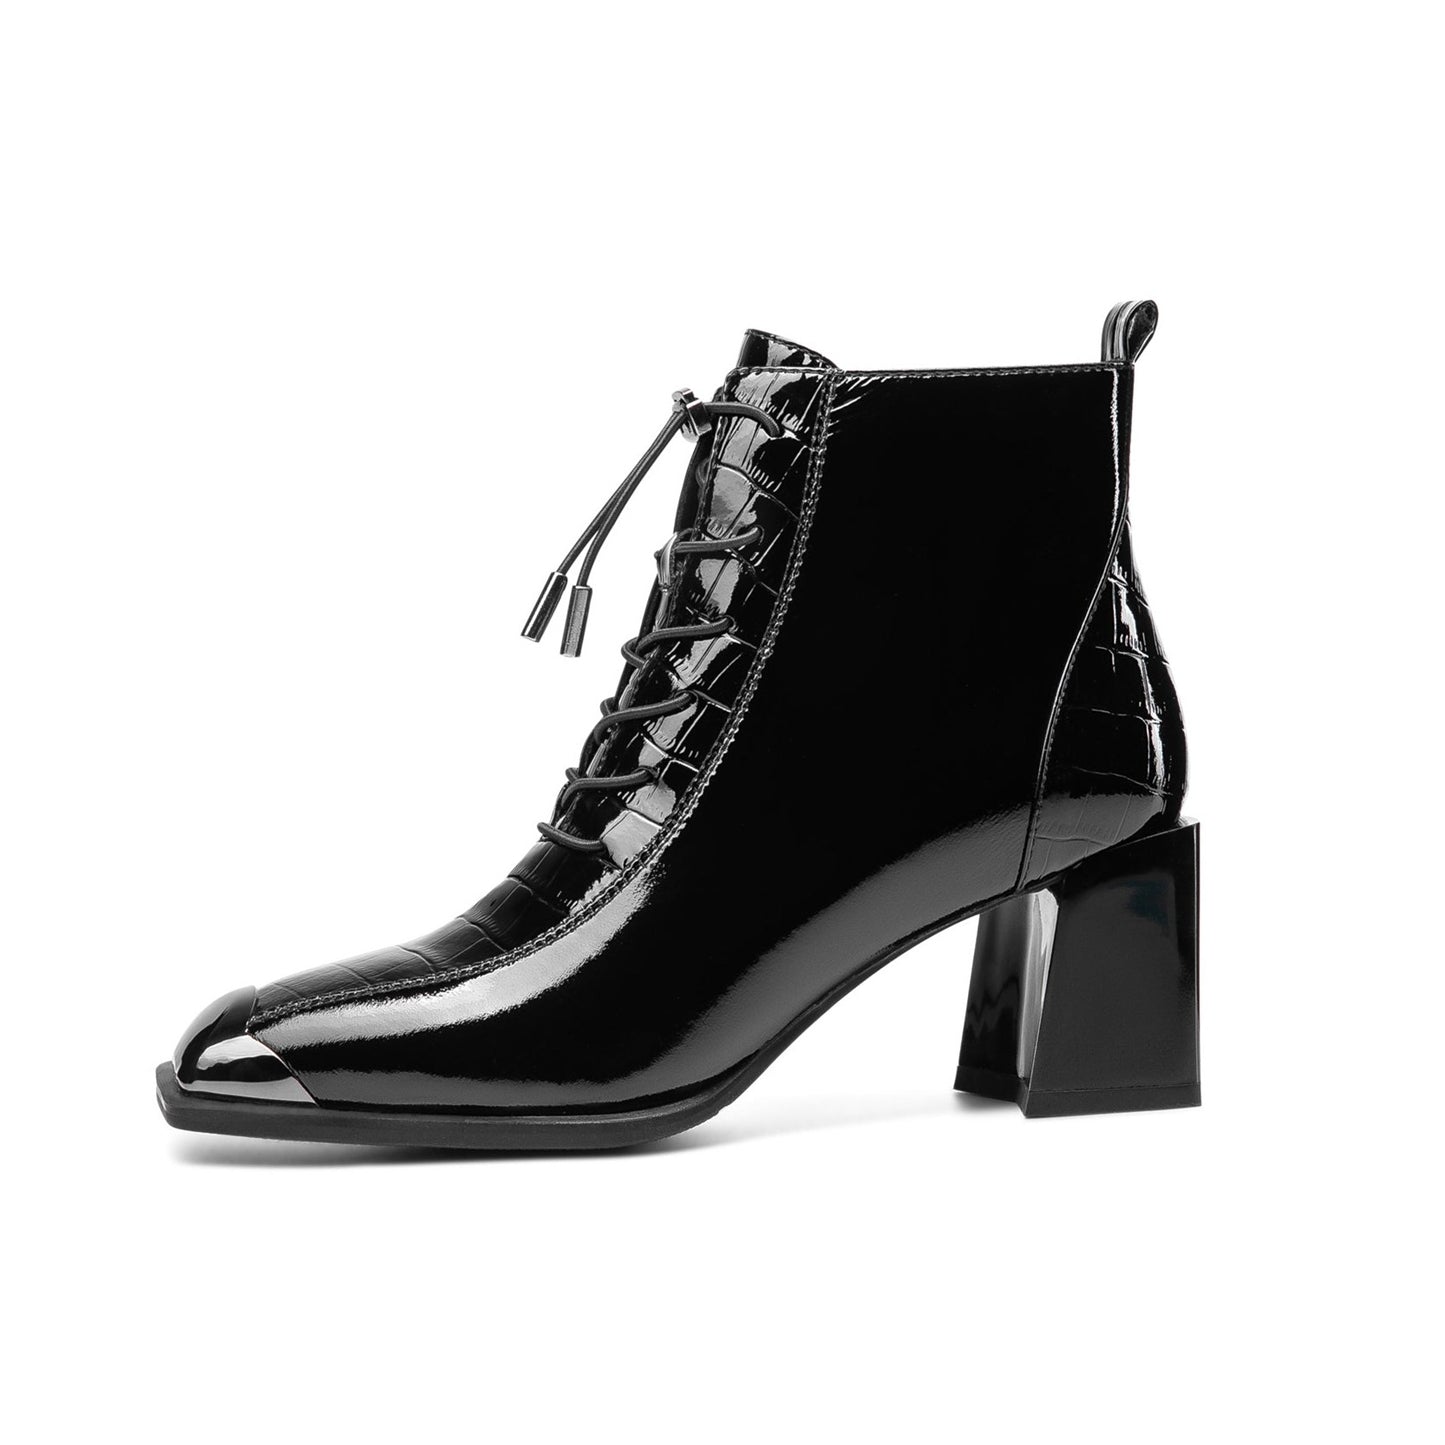 TinaCus Women's Patent Leather Handmade Square Cap-Toe Mid Chunky Heel Side Zipper Ankle Boots with Band